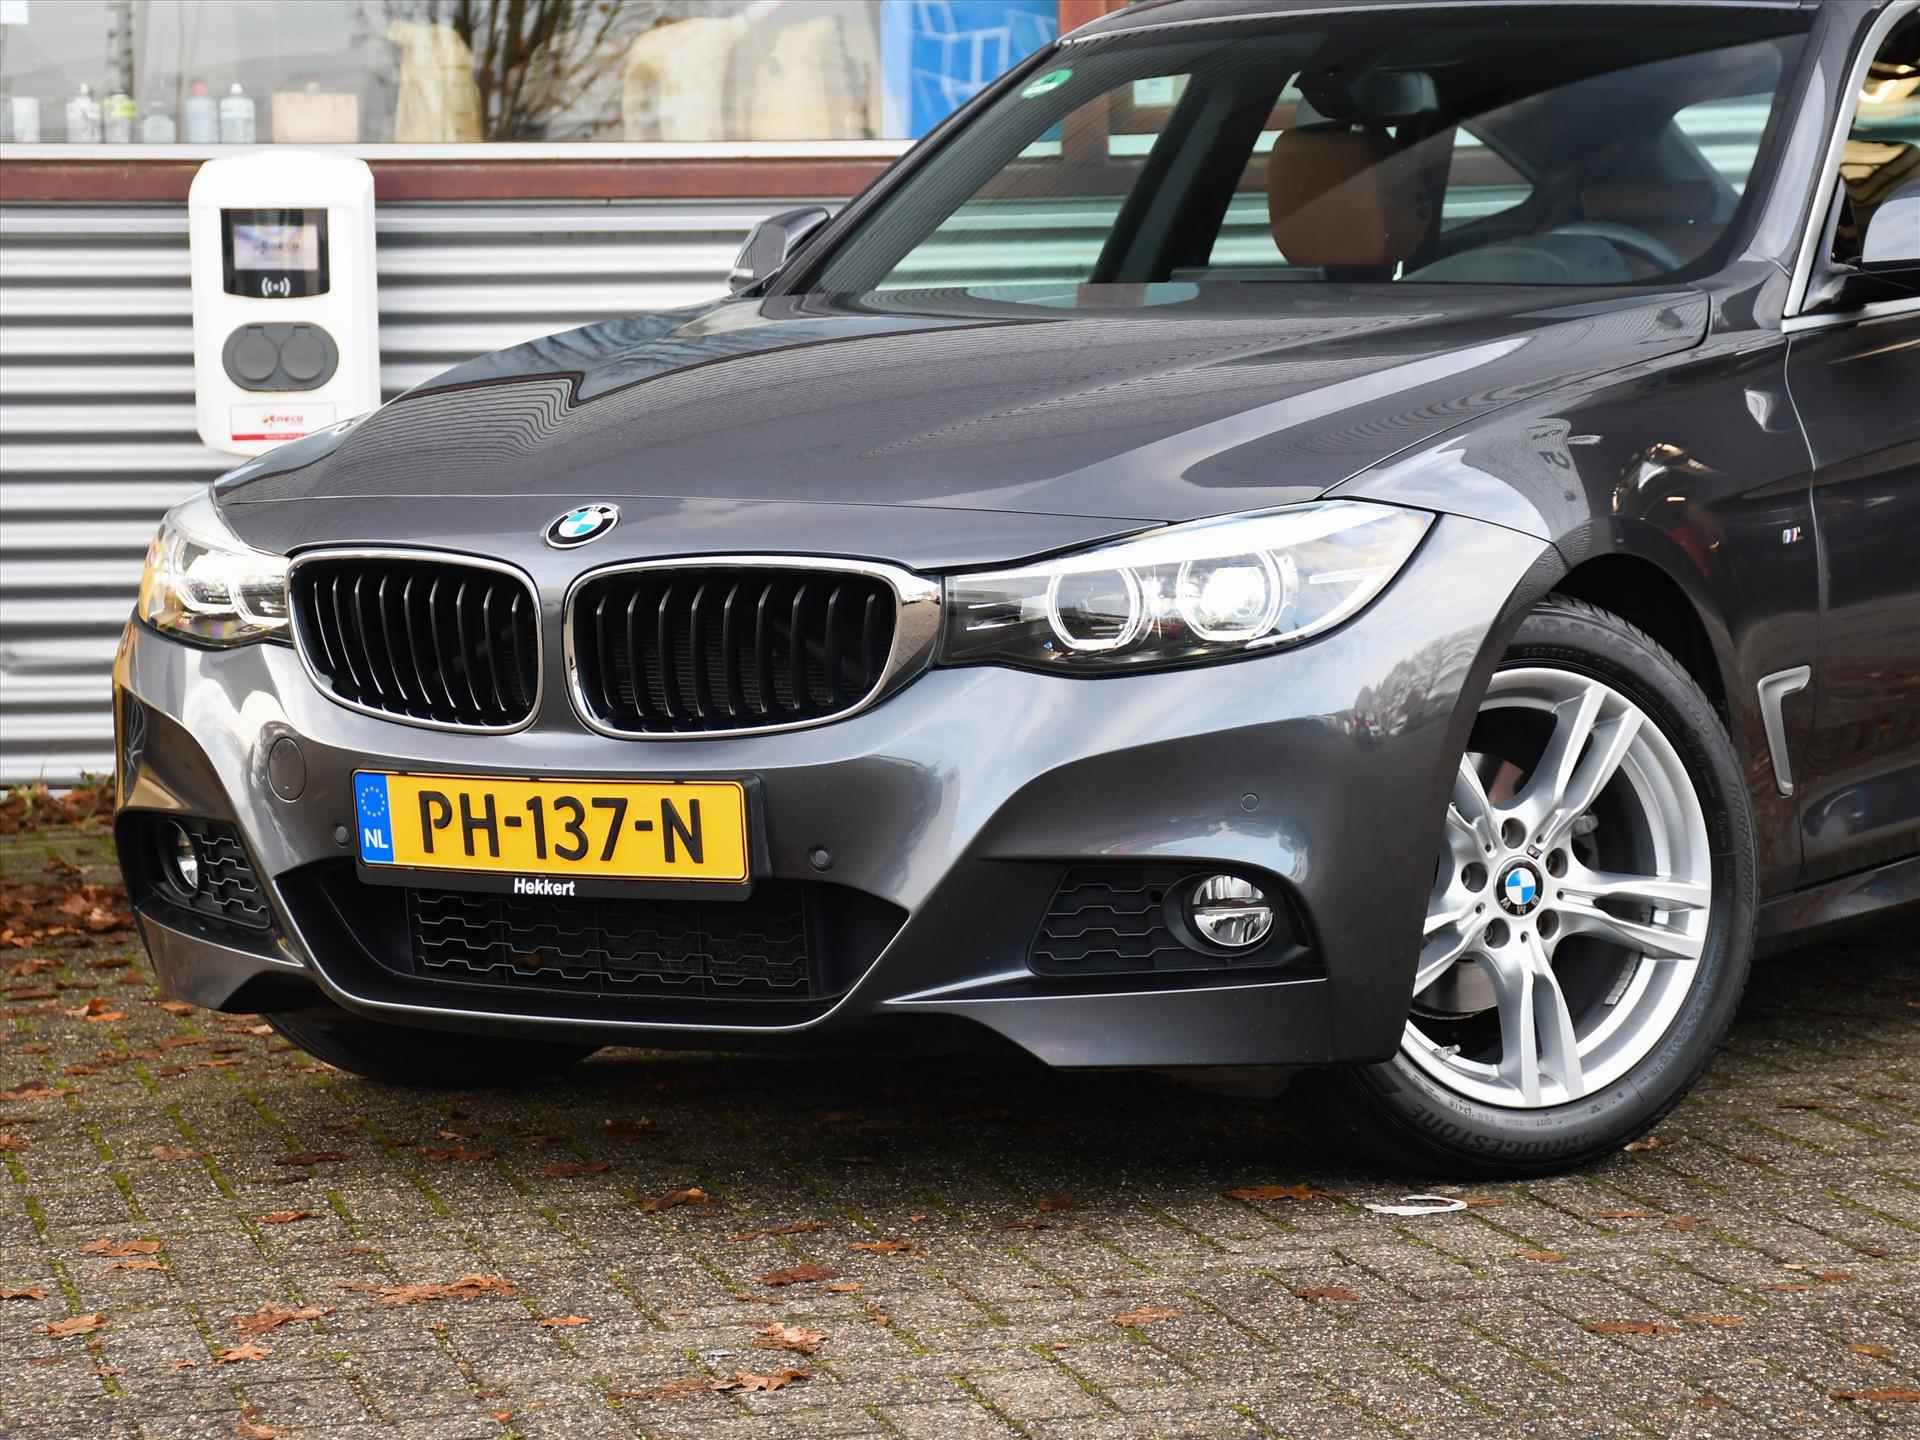 BMW 3-Serie Gran Turismo (f34) 320i High Executive XDrive 184pk Automaat CRUISE.C | PDC | LED | LEDER | 18''LM | NAVI | STOELVERW. VOOR - 2/34